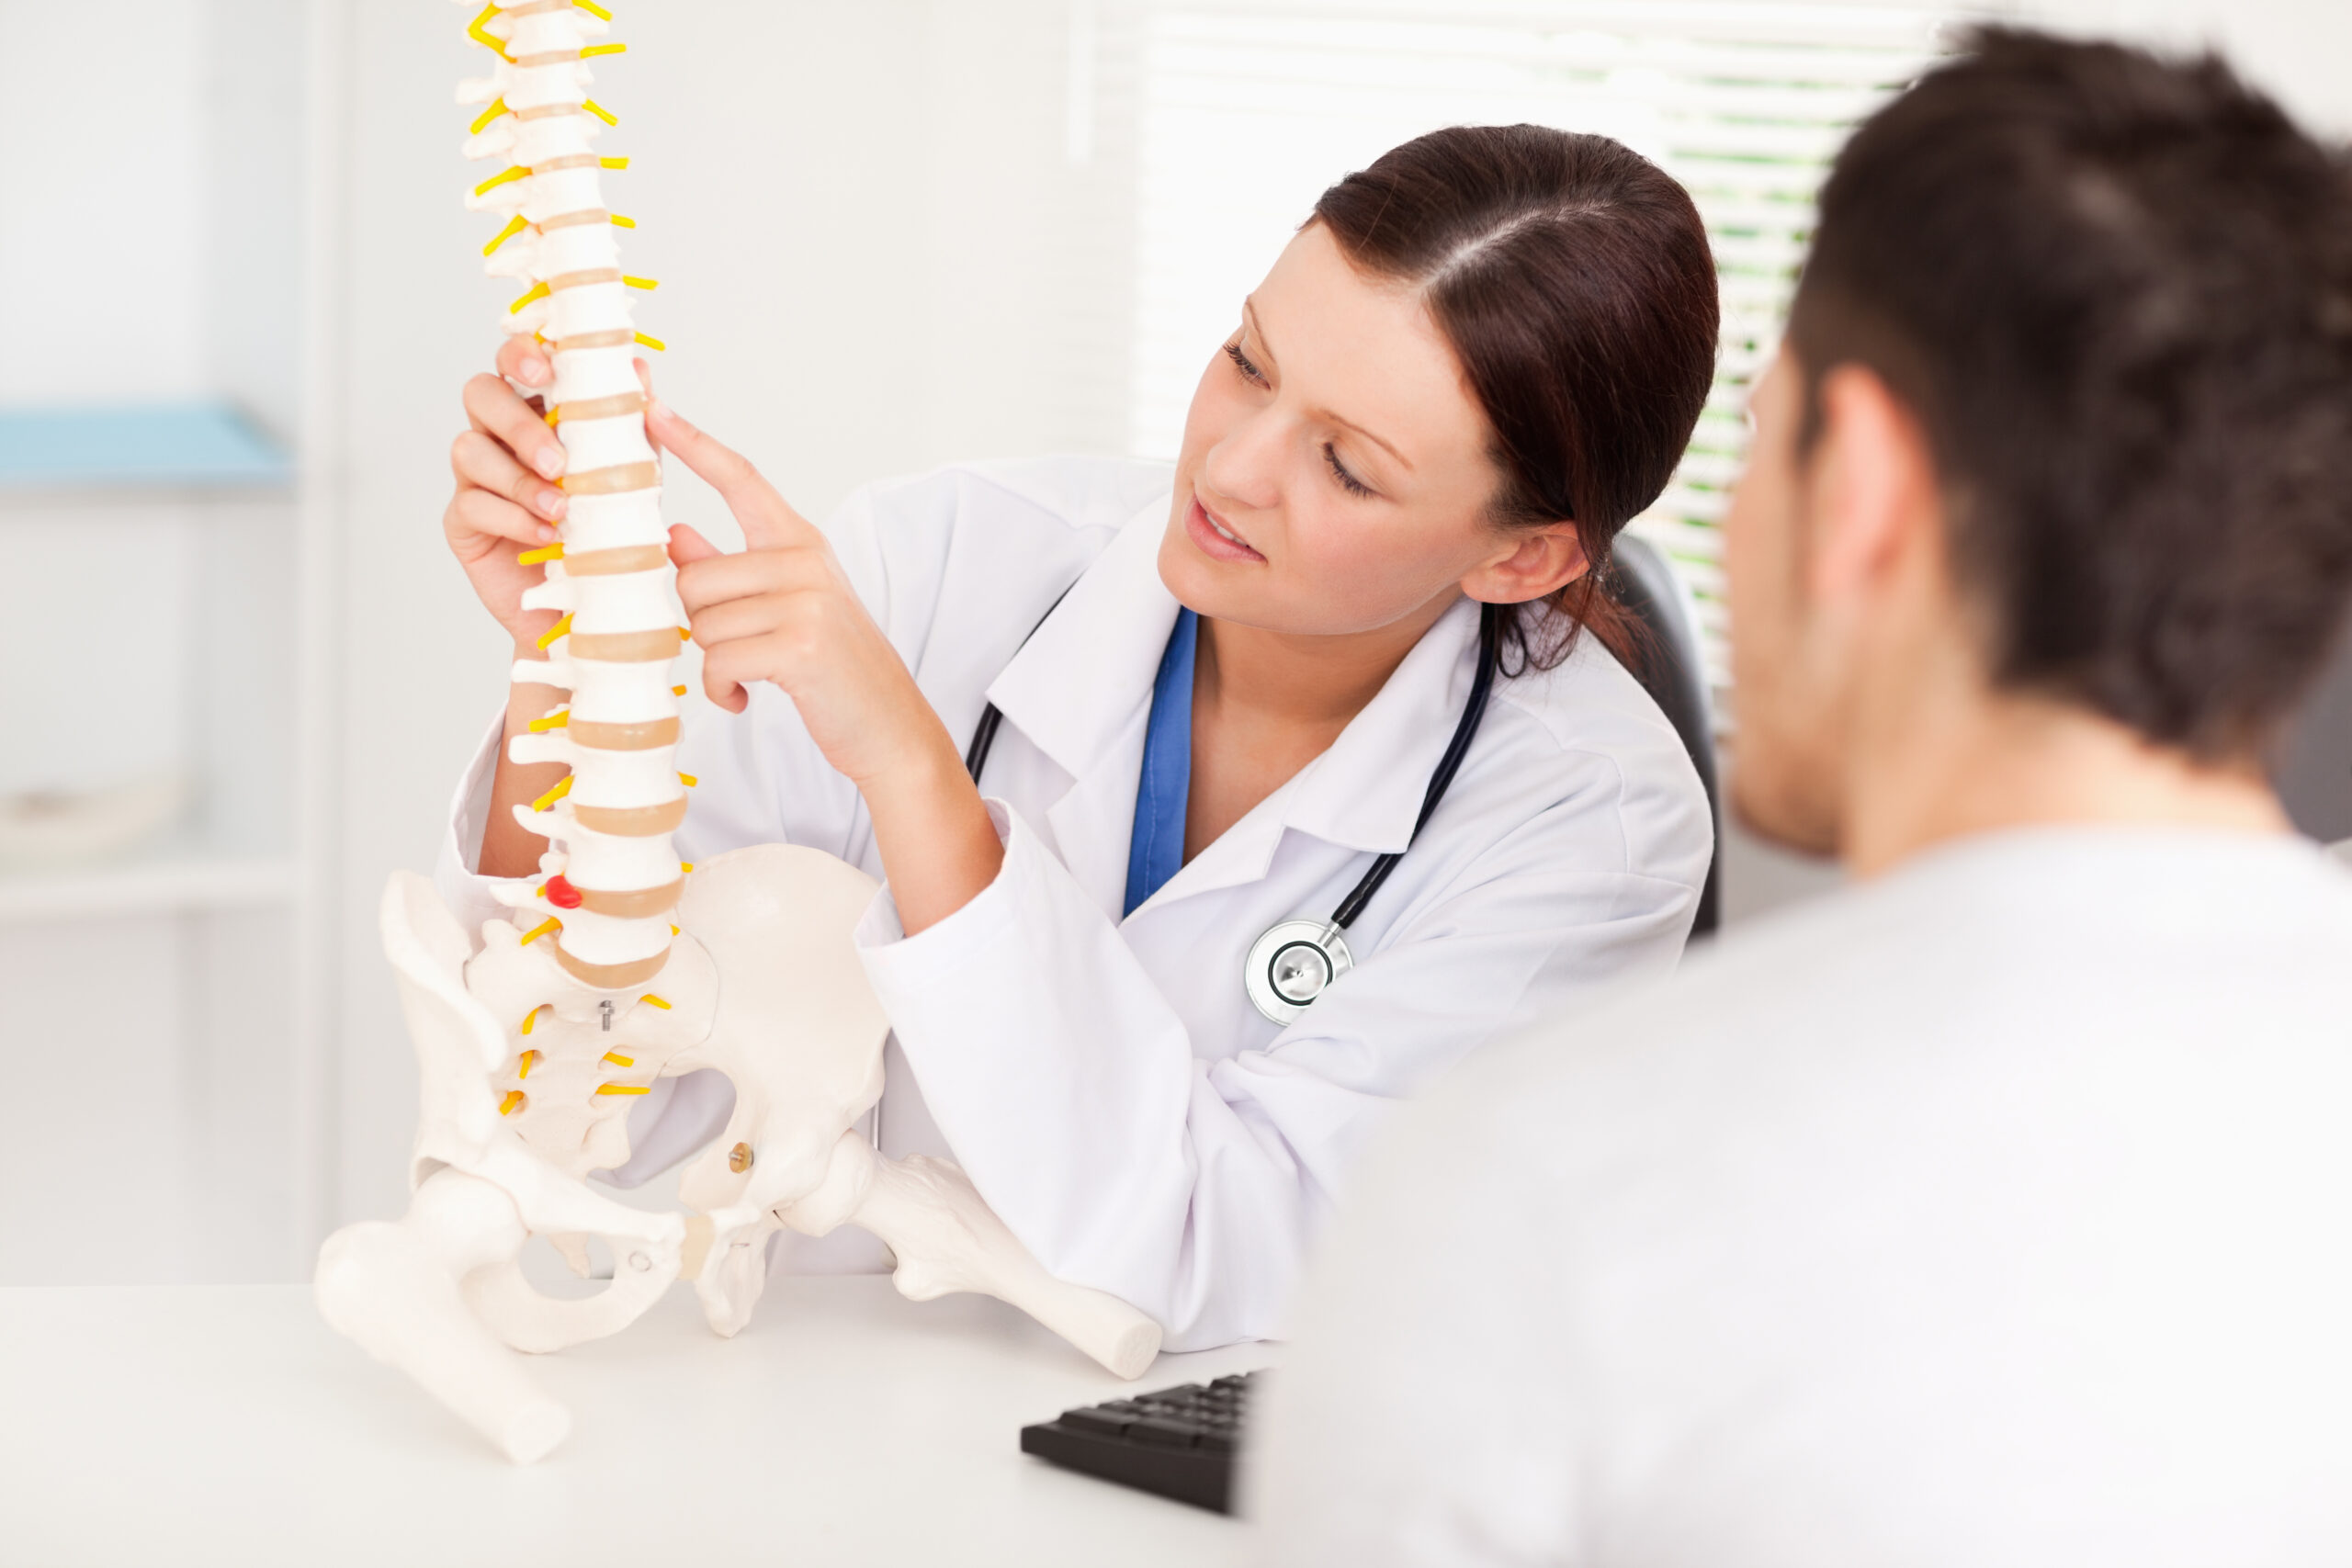 A female back pain doctor holding a model of the human spine and speaking with a male patient about his treatment options.